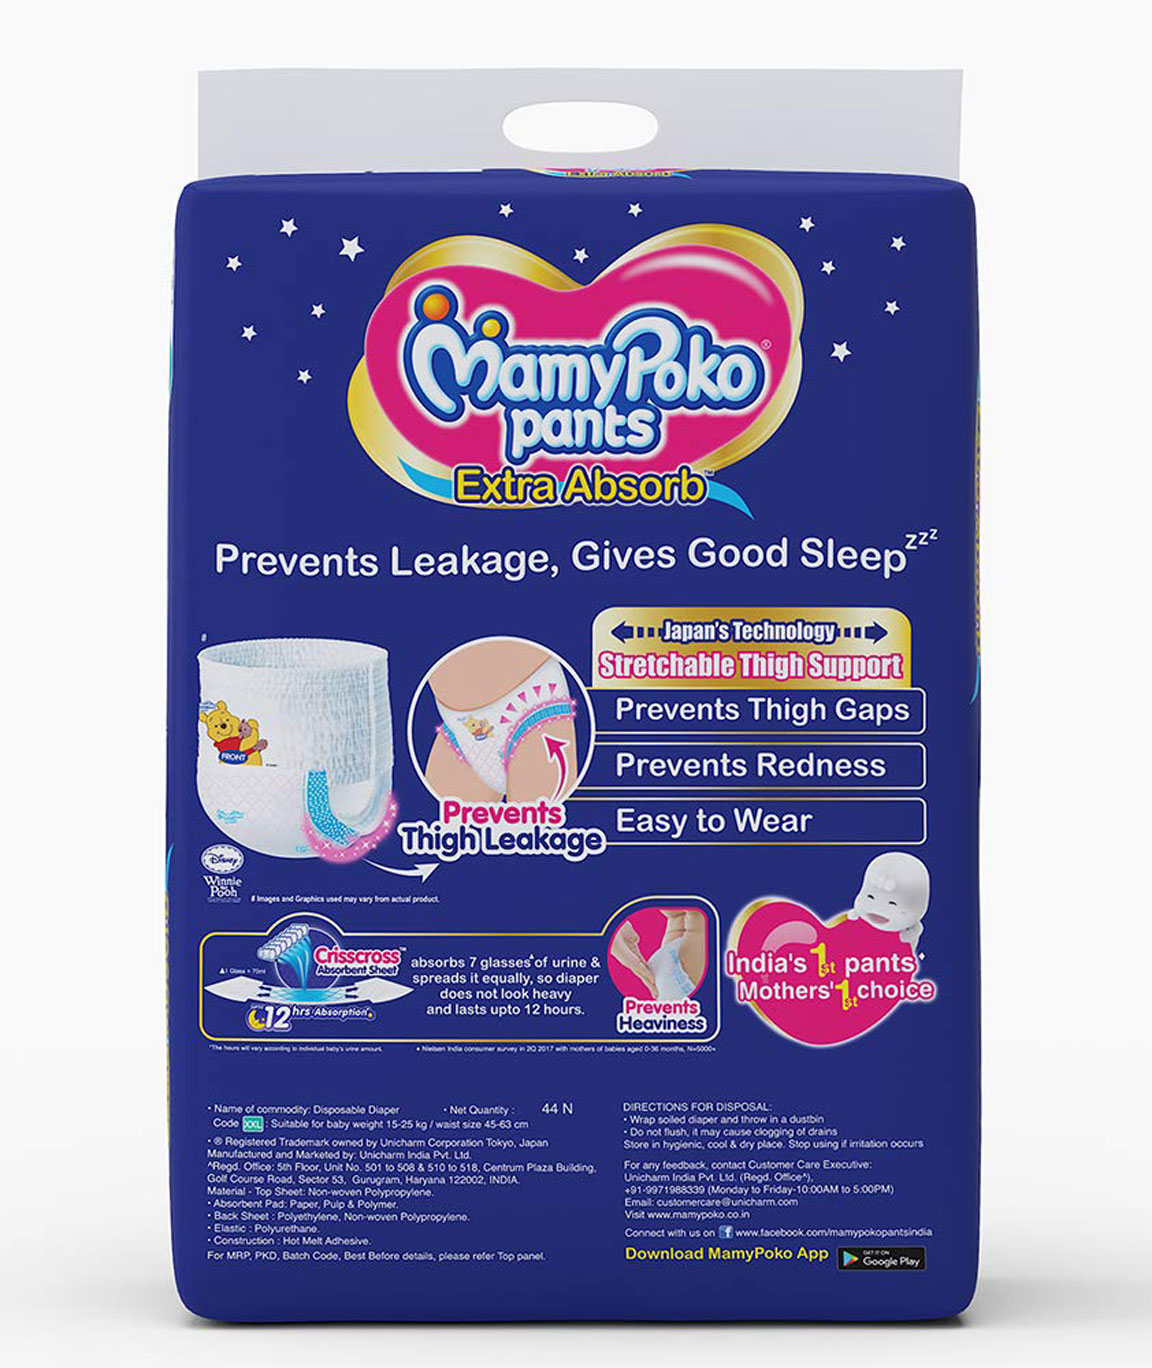 MamyPoko Pants Extra Absorb Diaper - Large Size, Pack of 112 Diapers  (L-112) - L - Buy 112 MamyPoko Pant Diapers | Flipkart.com